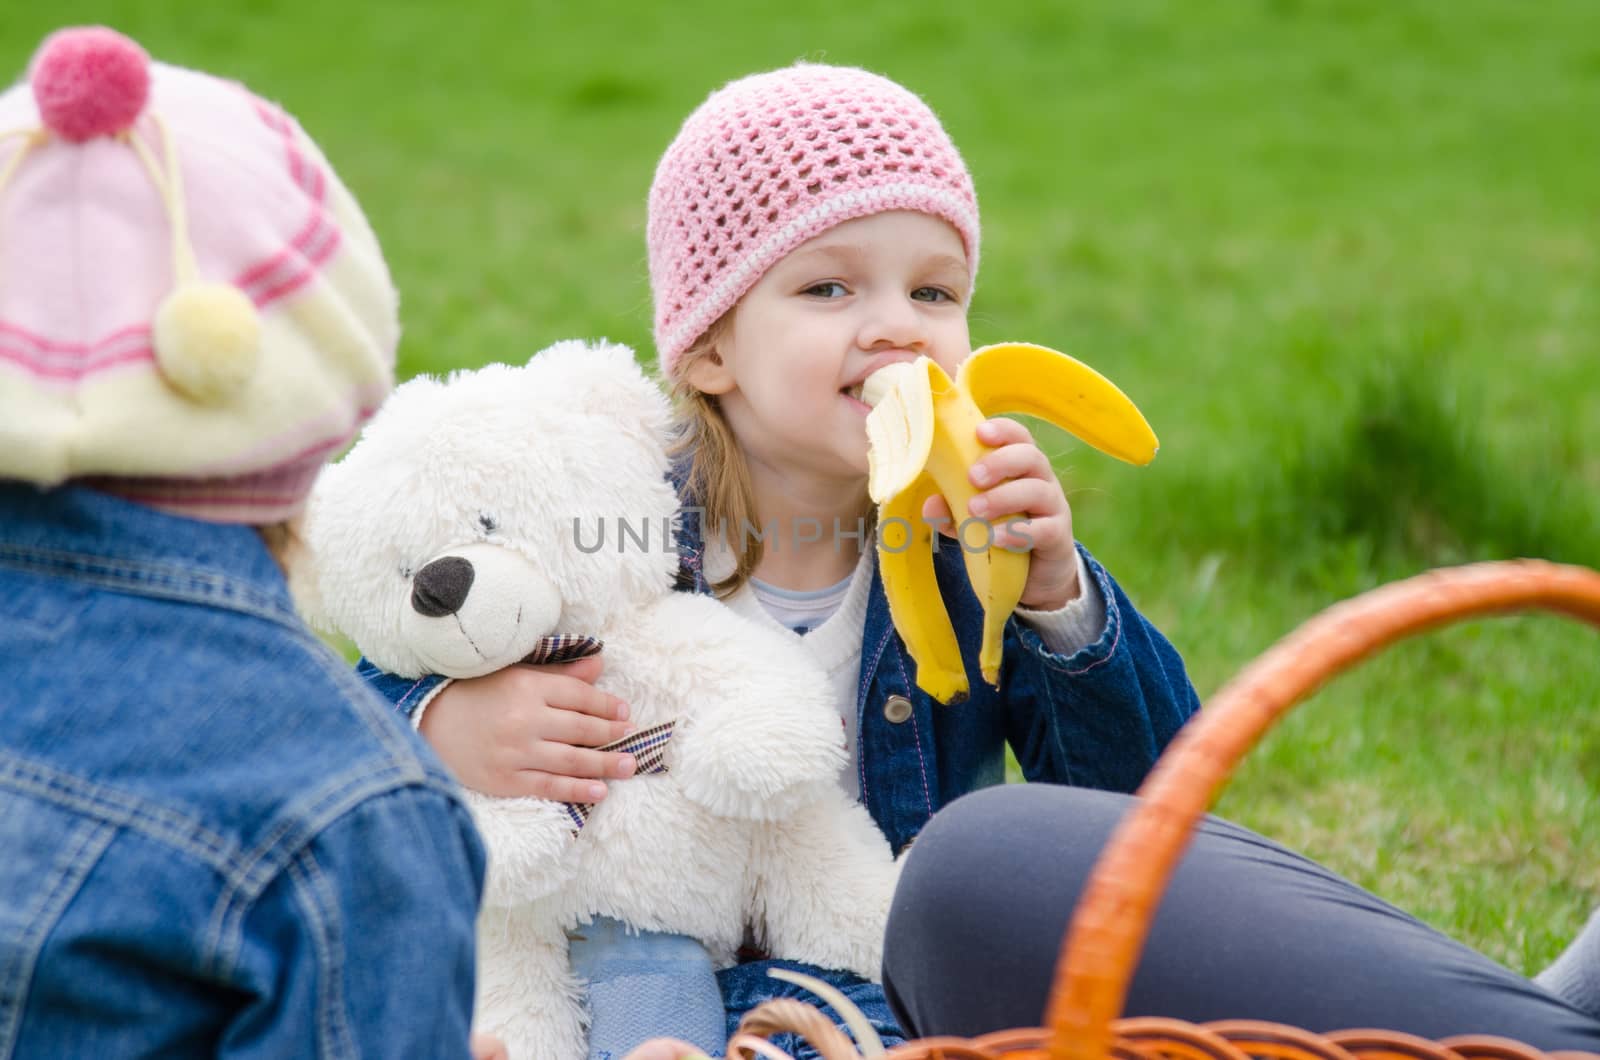 Girl on picnic eats a banana and holds bear by Madhourse